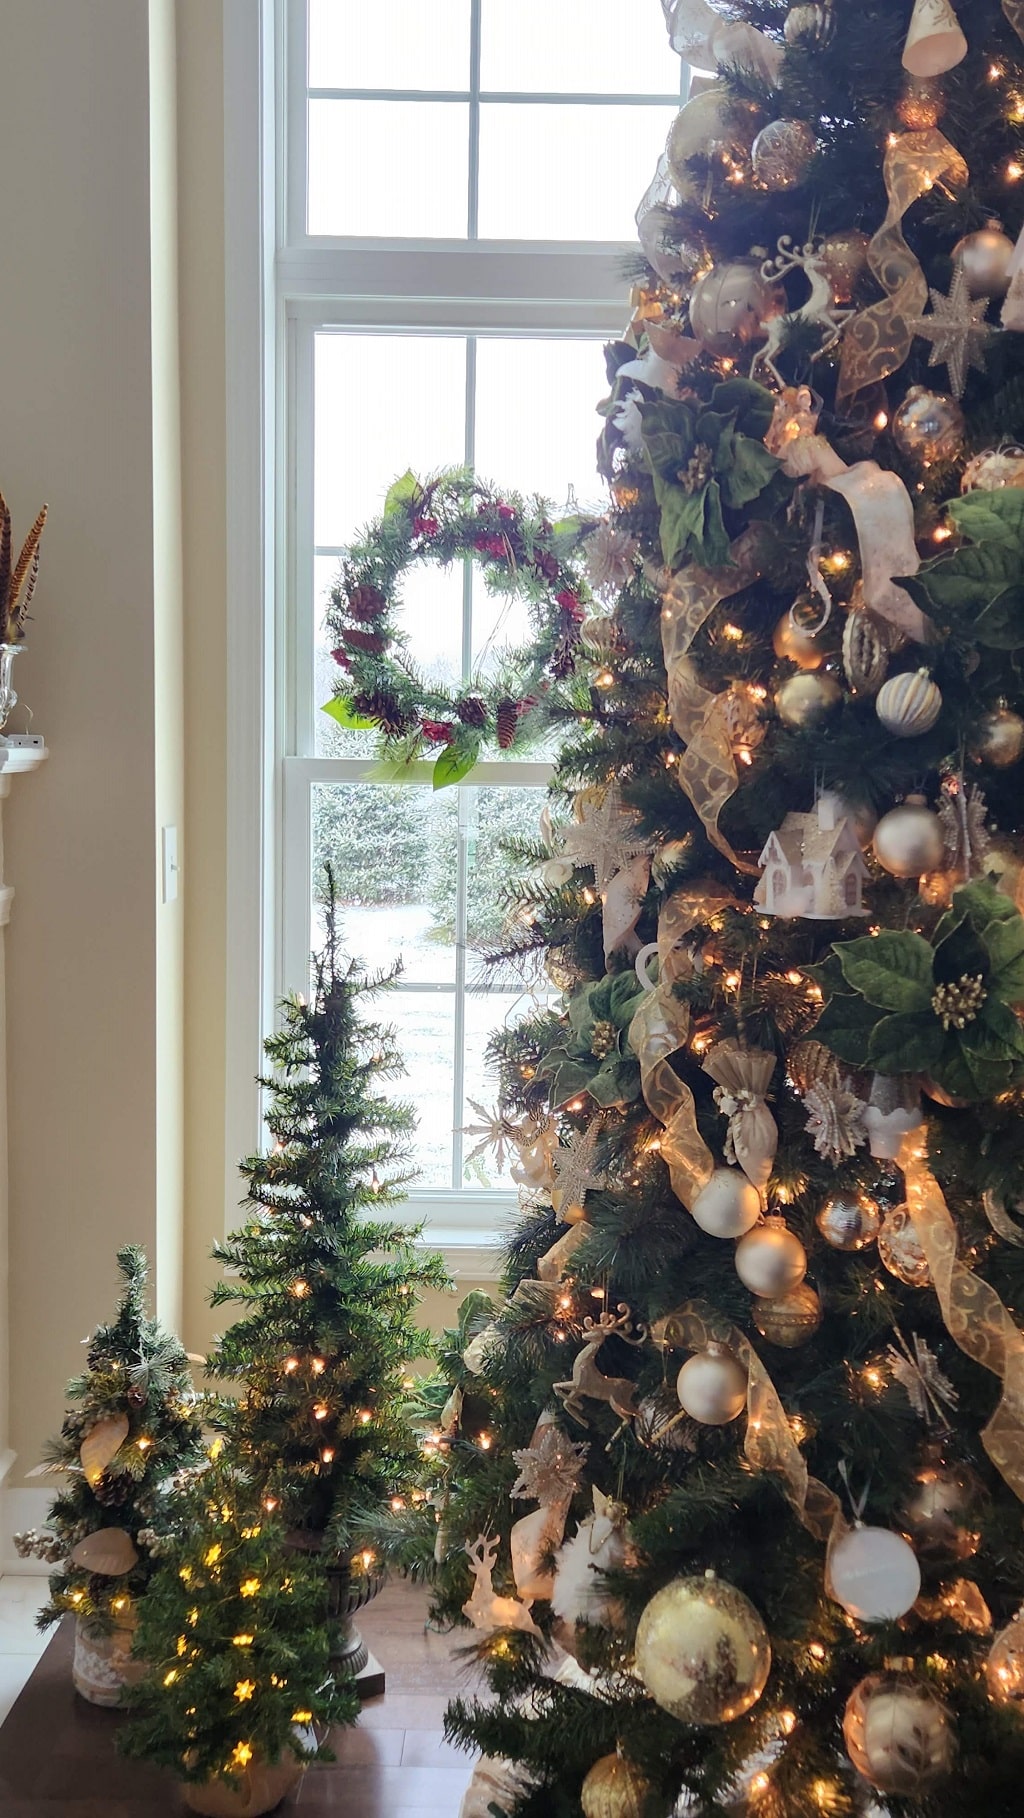 How to Layer Christmas Tree Decorations Like a Pro